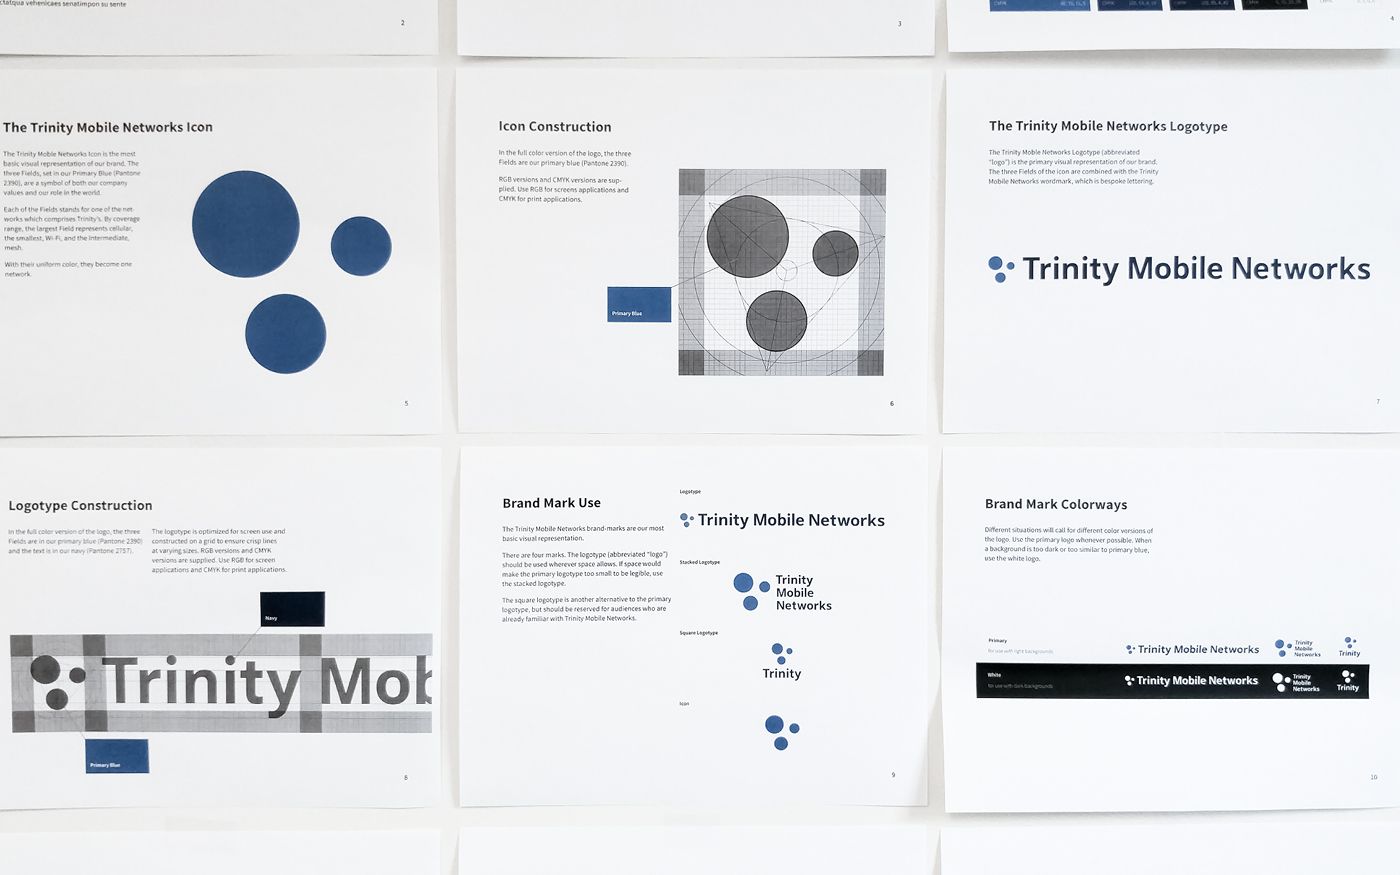 Pages from the Trinity Mobile Networks brand guidelines